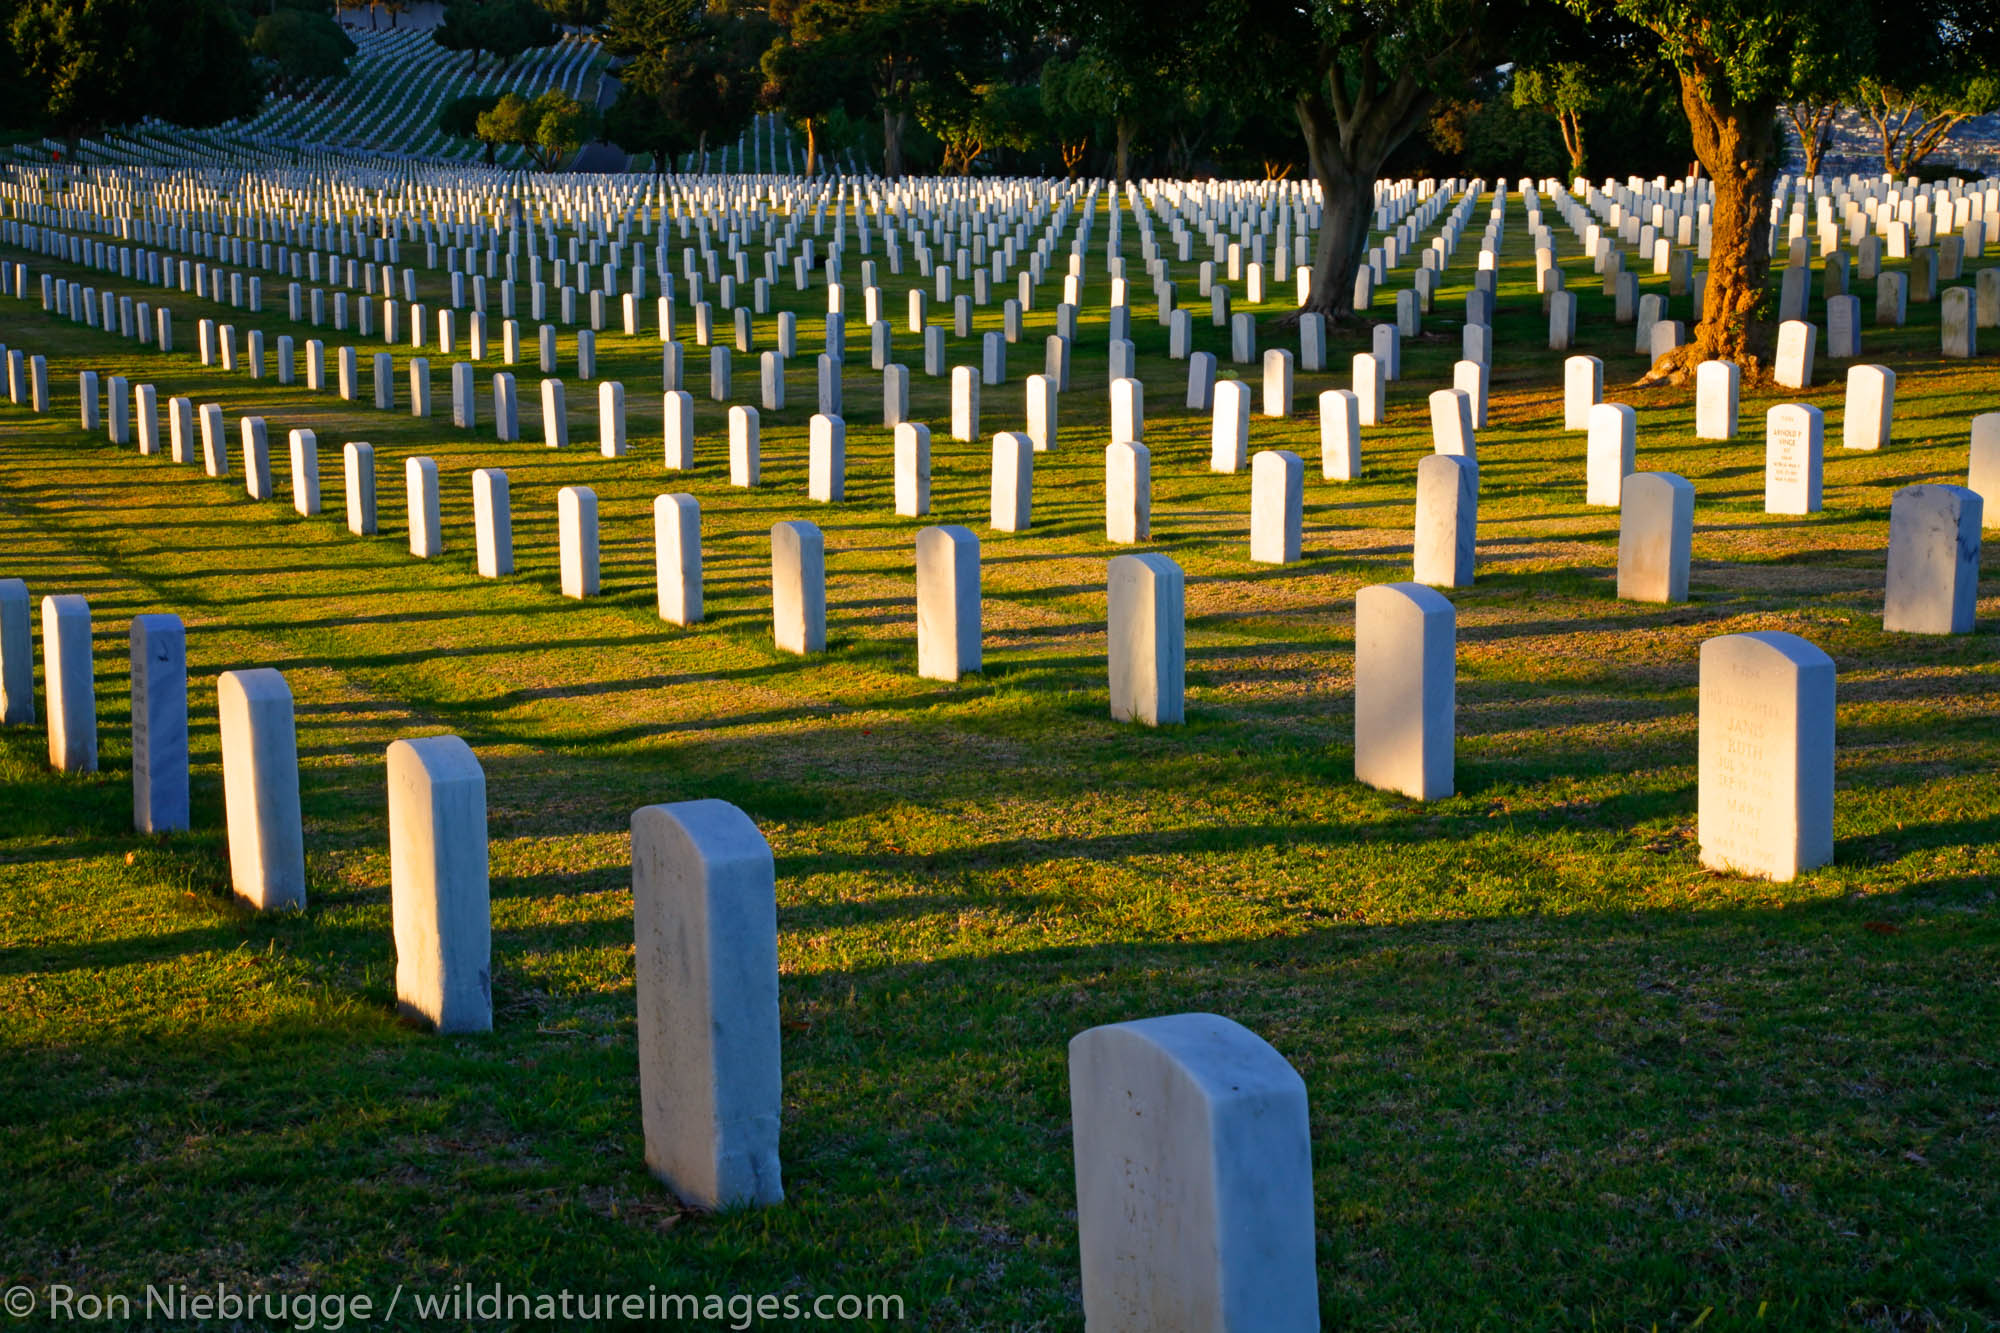 The Fort Rosecrans National Cemetery on Point Loma, San Diego, California.